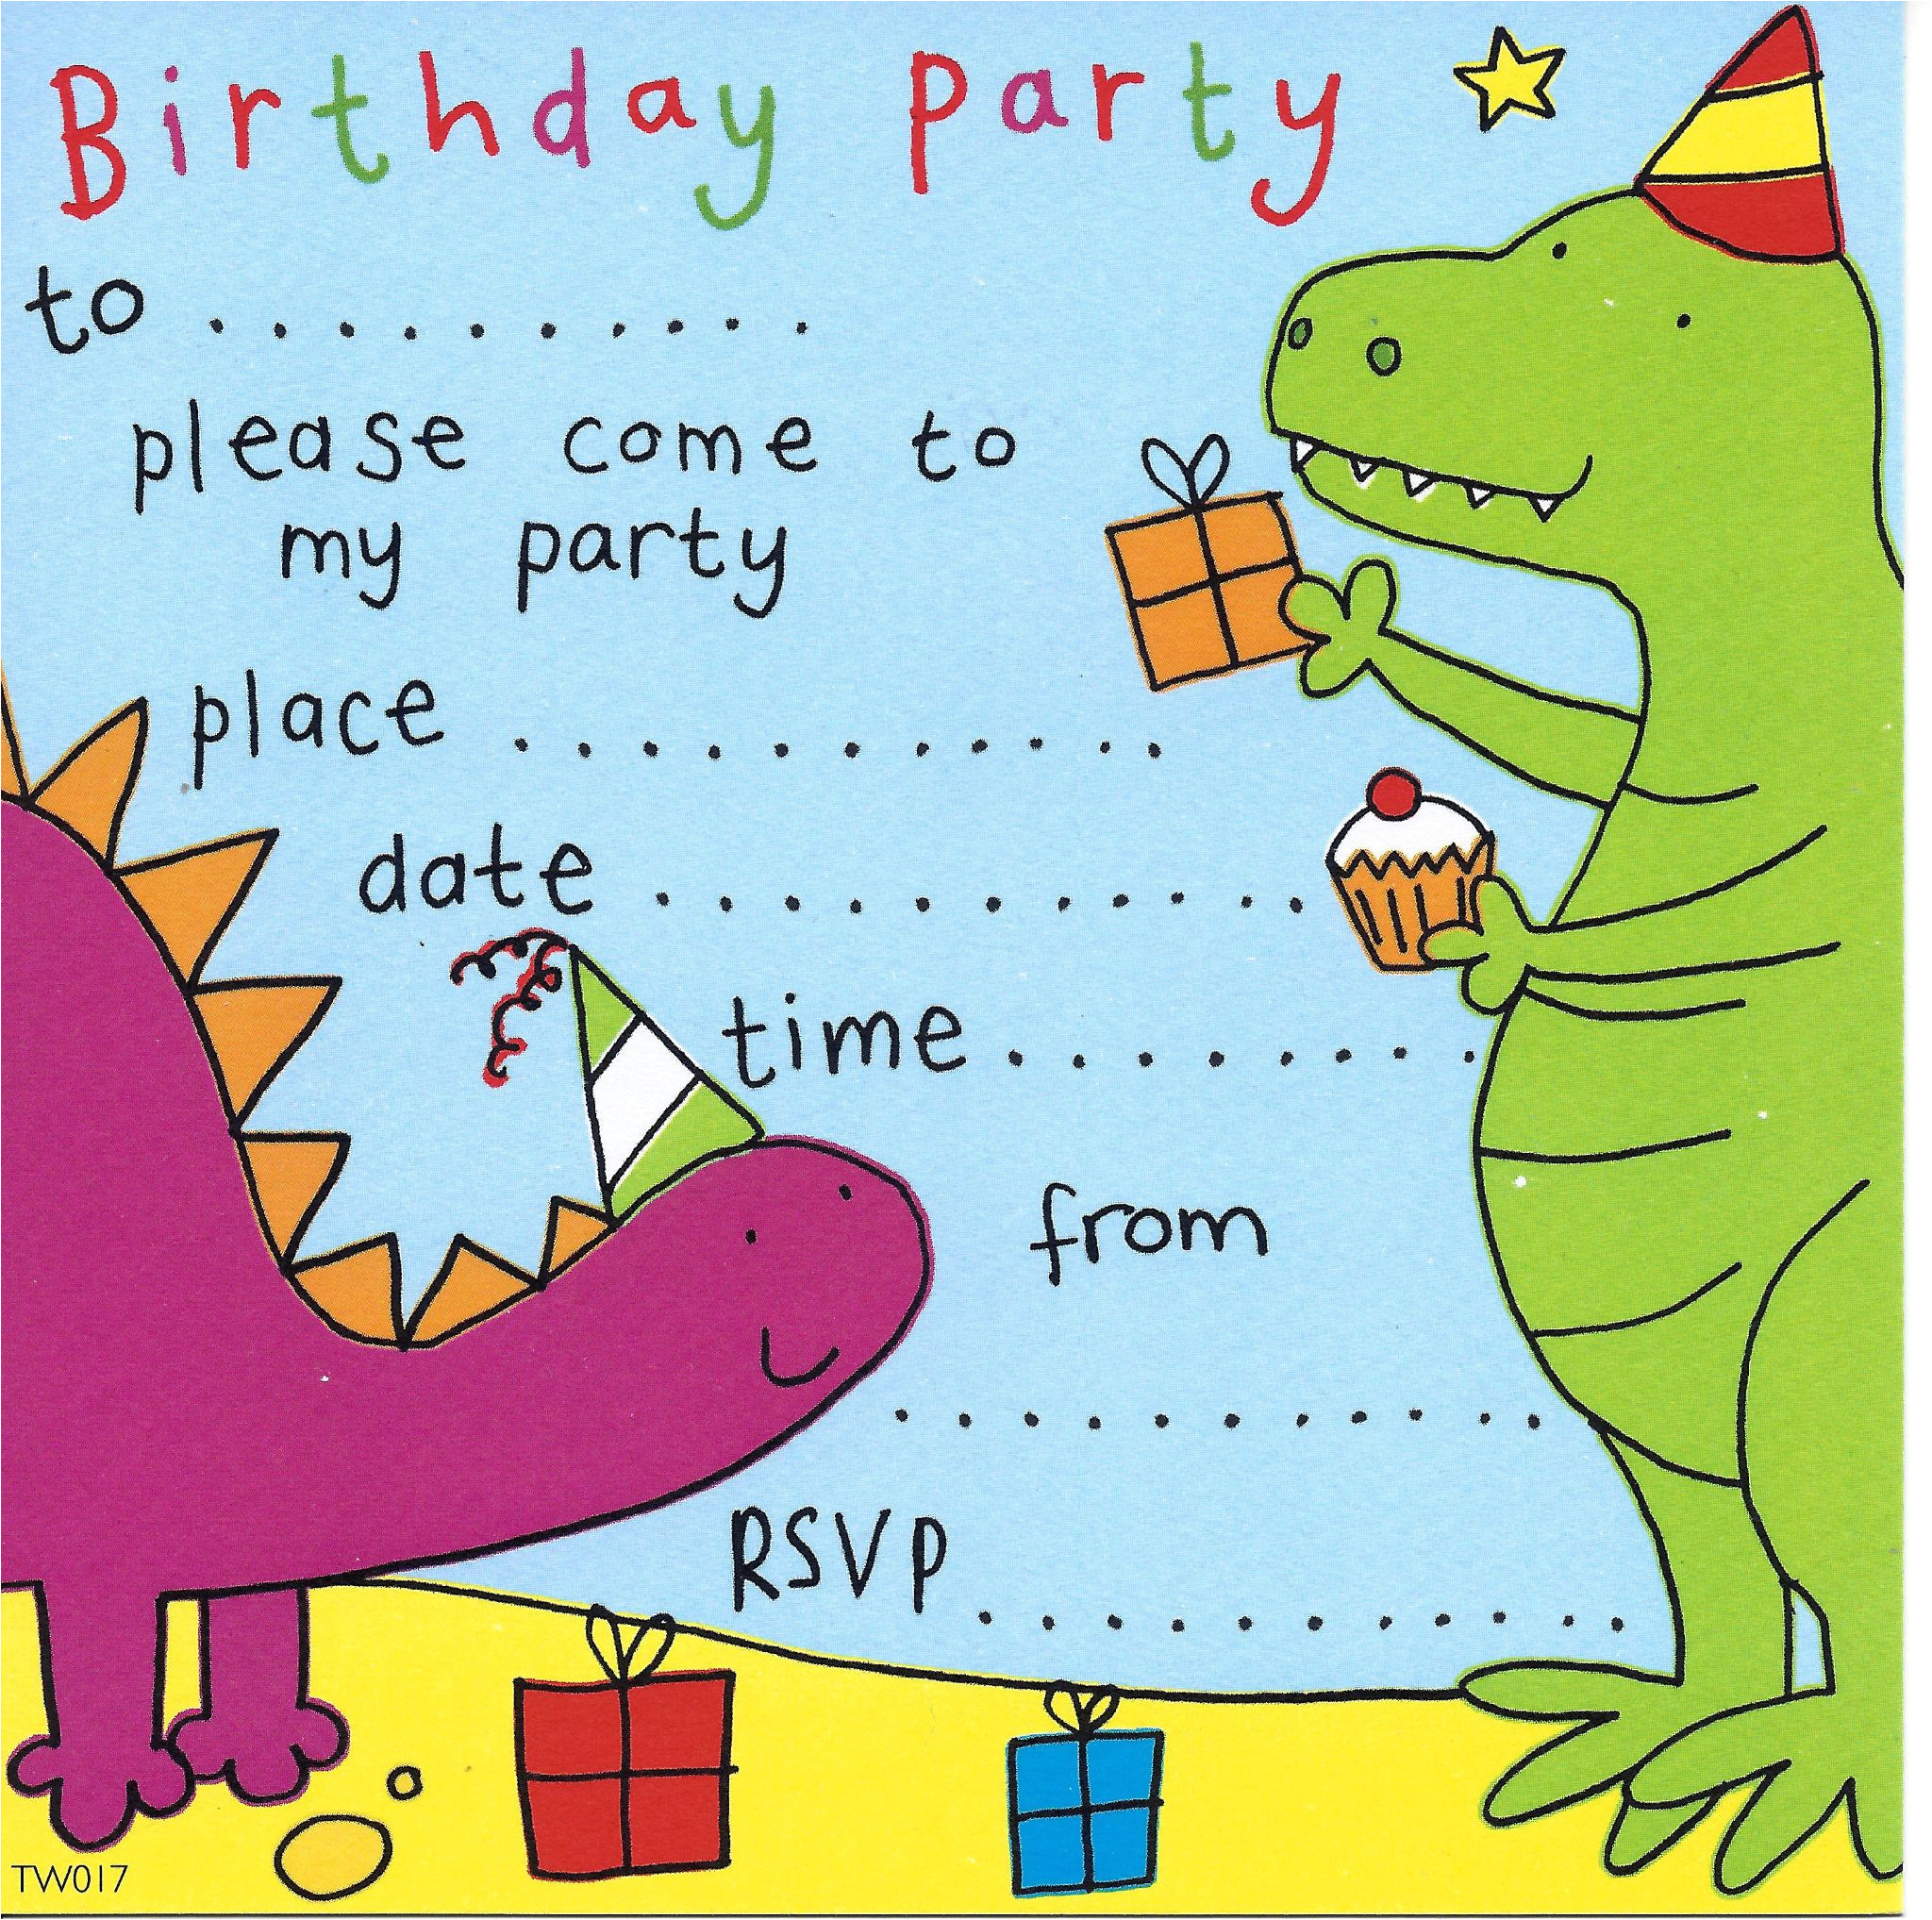 Childrens Party Invitation Template Party Invitations Birthday Party Invitations Kids Party